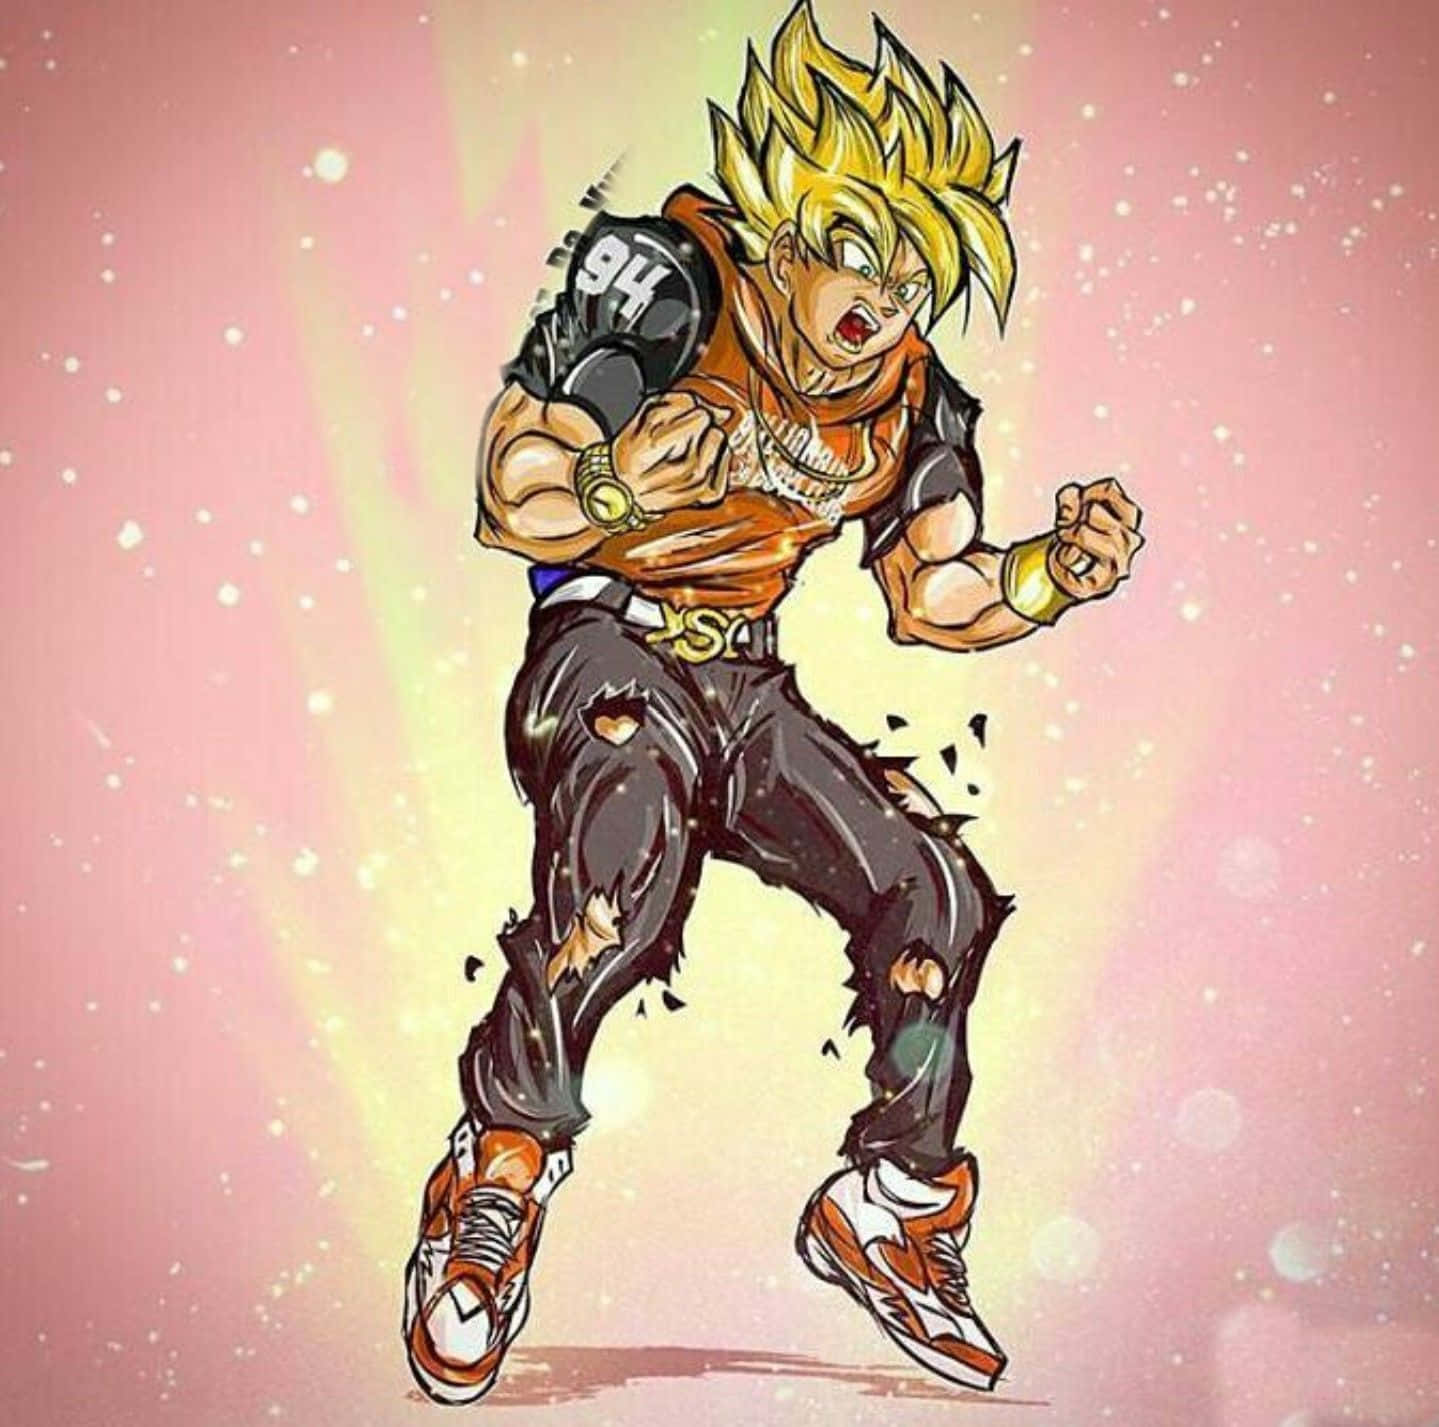 Goku Supreme leads the way with incredible strength, power and determination. Wallpaper